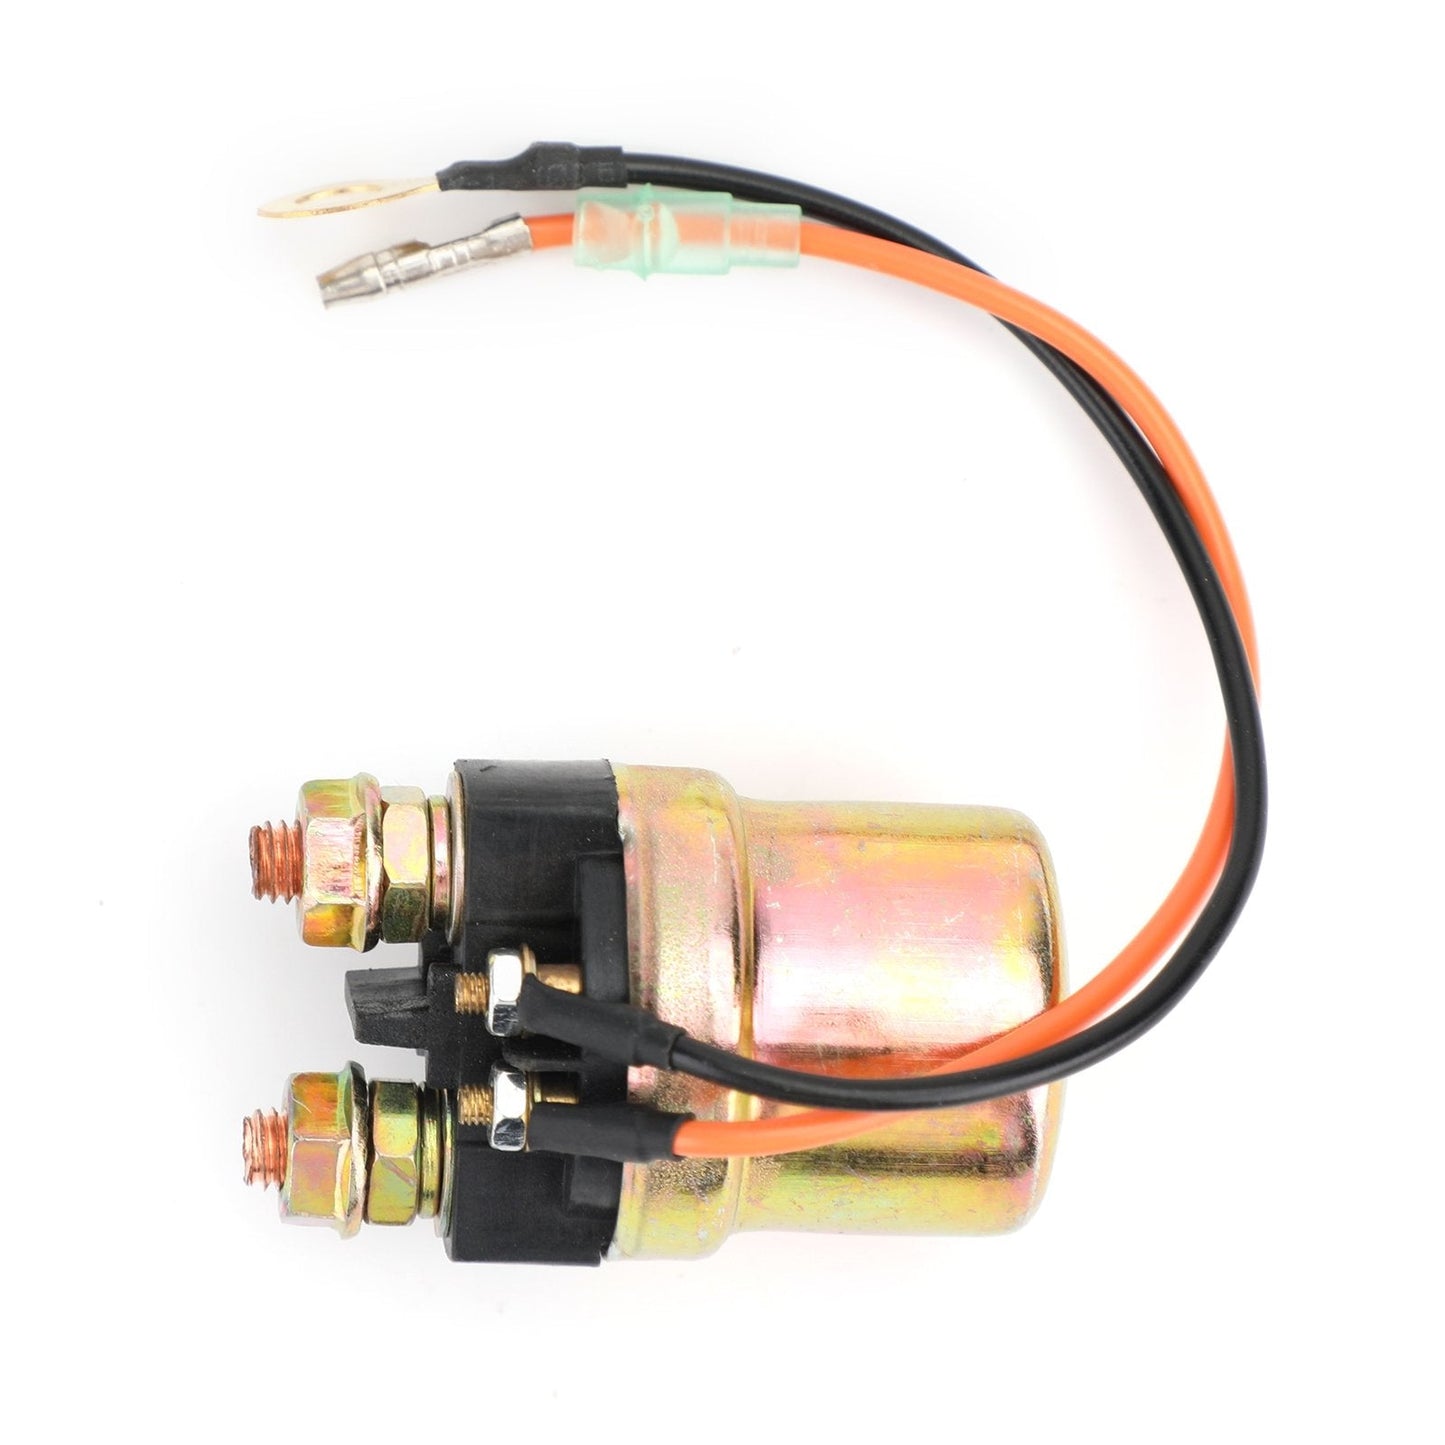 Starter Relay Solenoid For YAMAHA OUTBOARD 90HP 100HP 115HP 4-Stroke WR650 650cc Generic